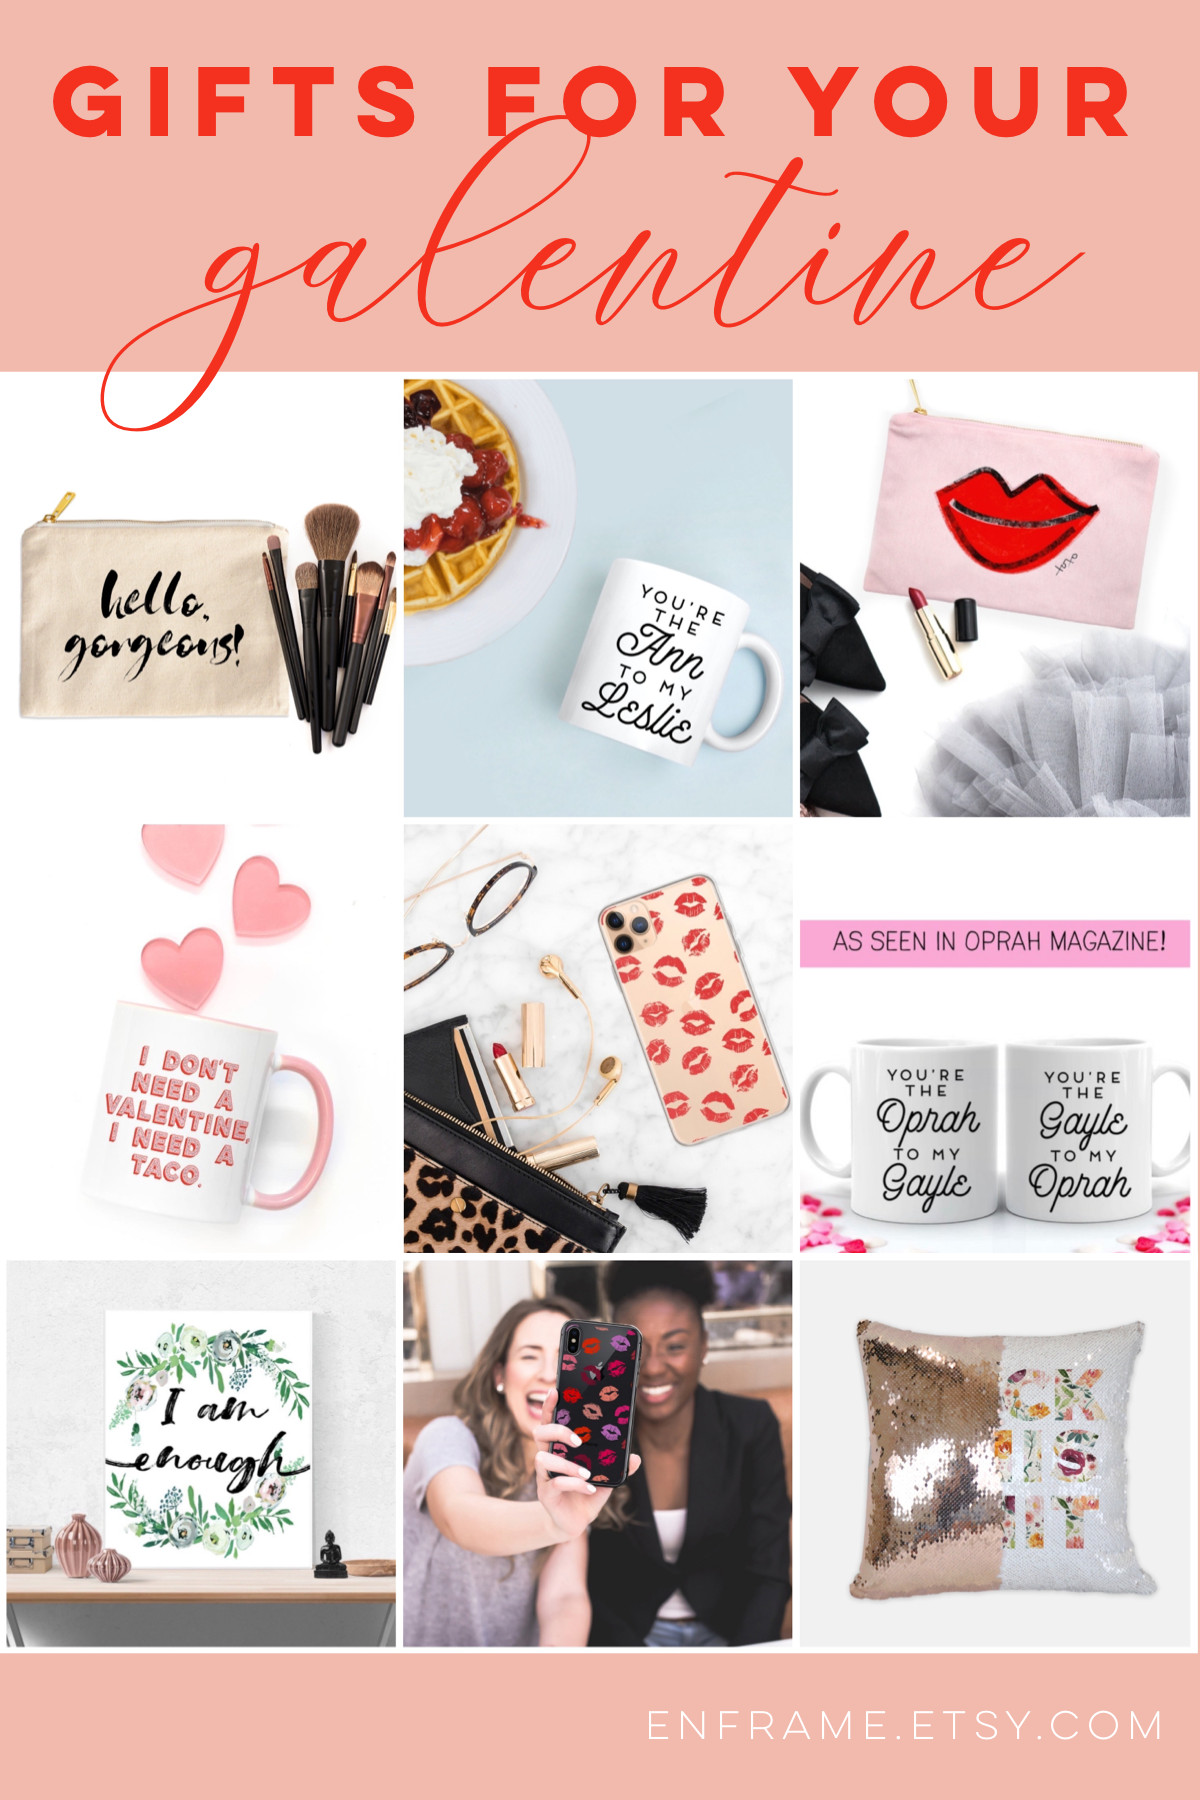 Valentines 2020 Gift Ideas
 Gift Ideas for your Galentine in 2020